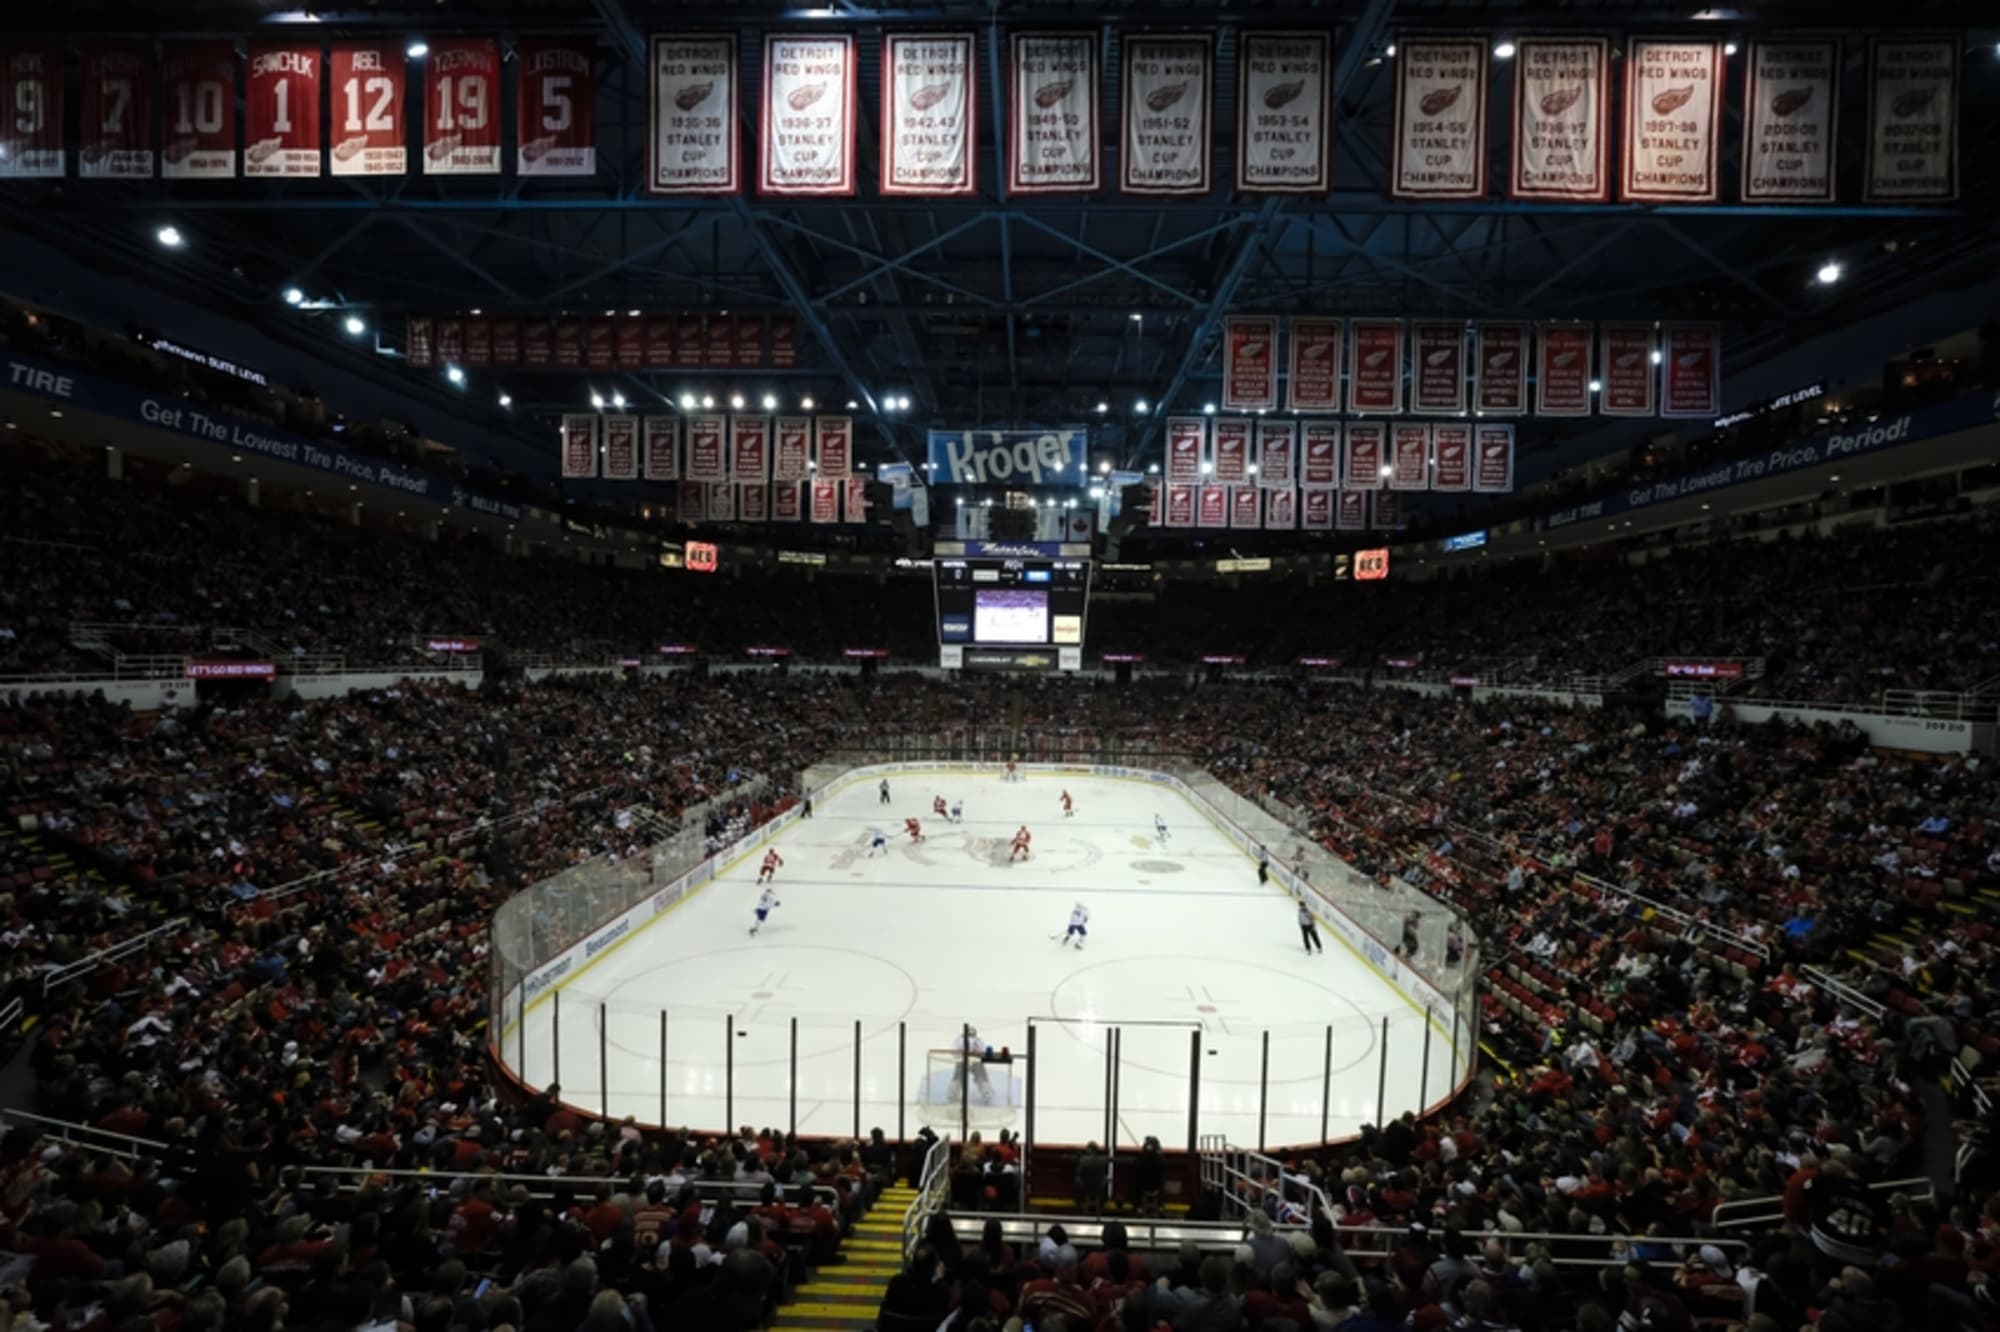 The most unforgettable Detroit Red Wings moments at Joe Louis Arena